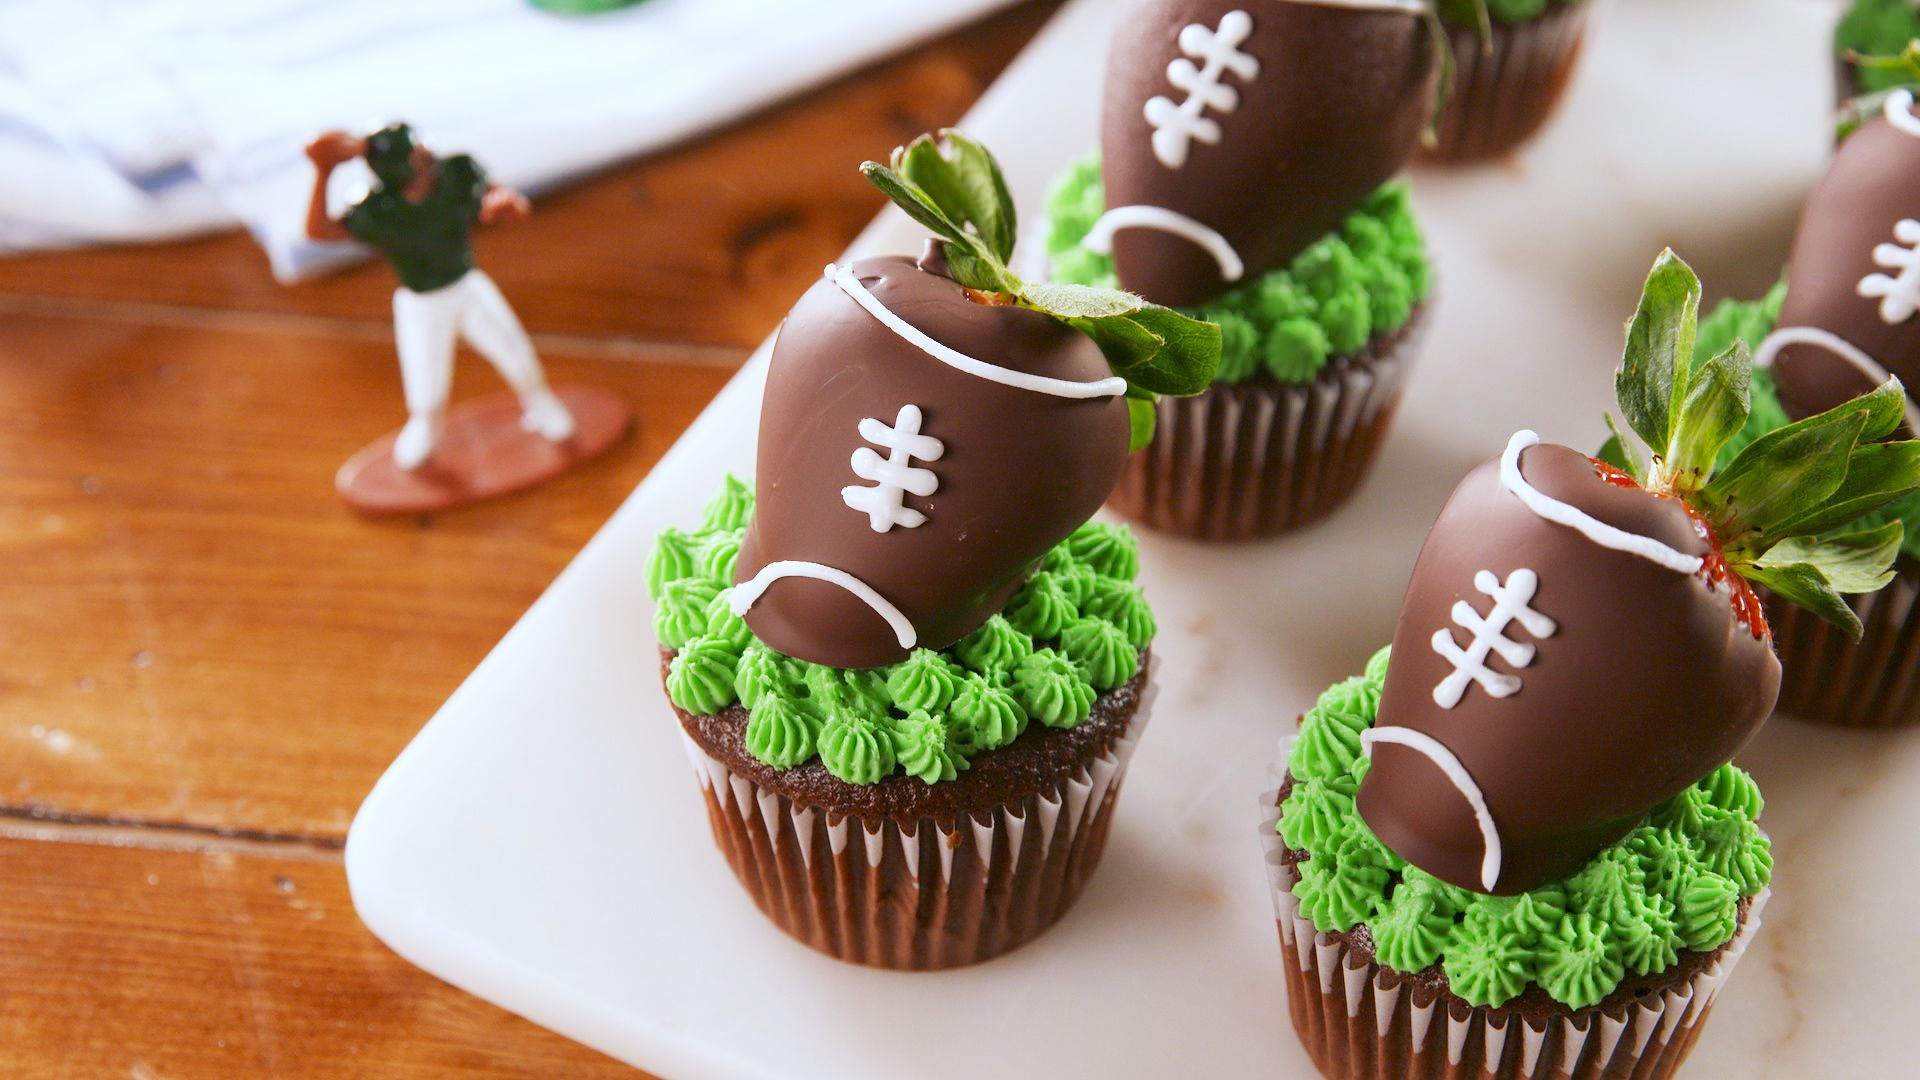 7 ways to get your home ready for a Super Bowl party